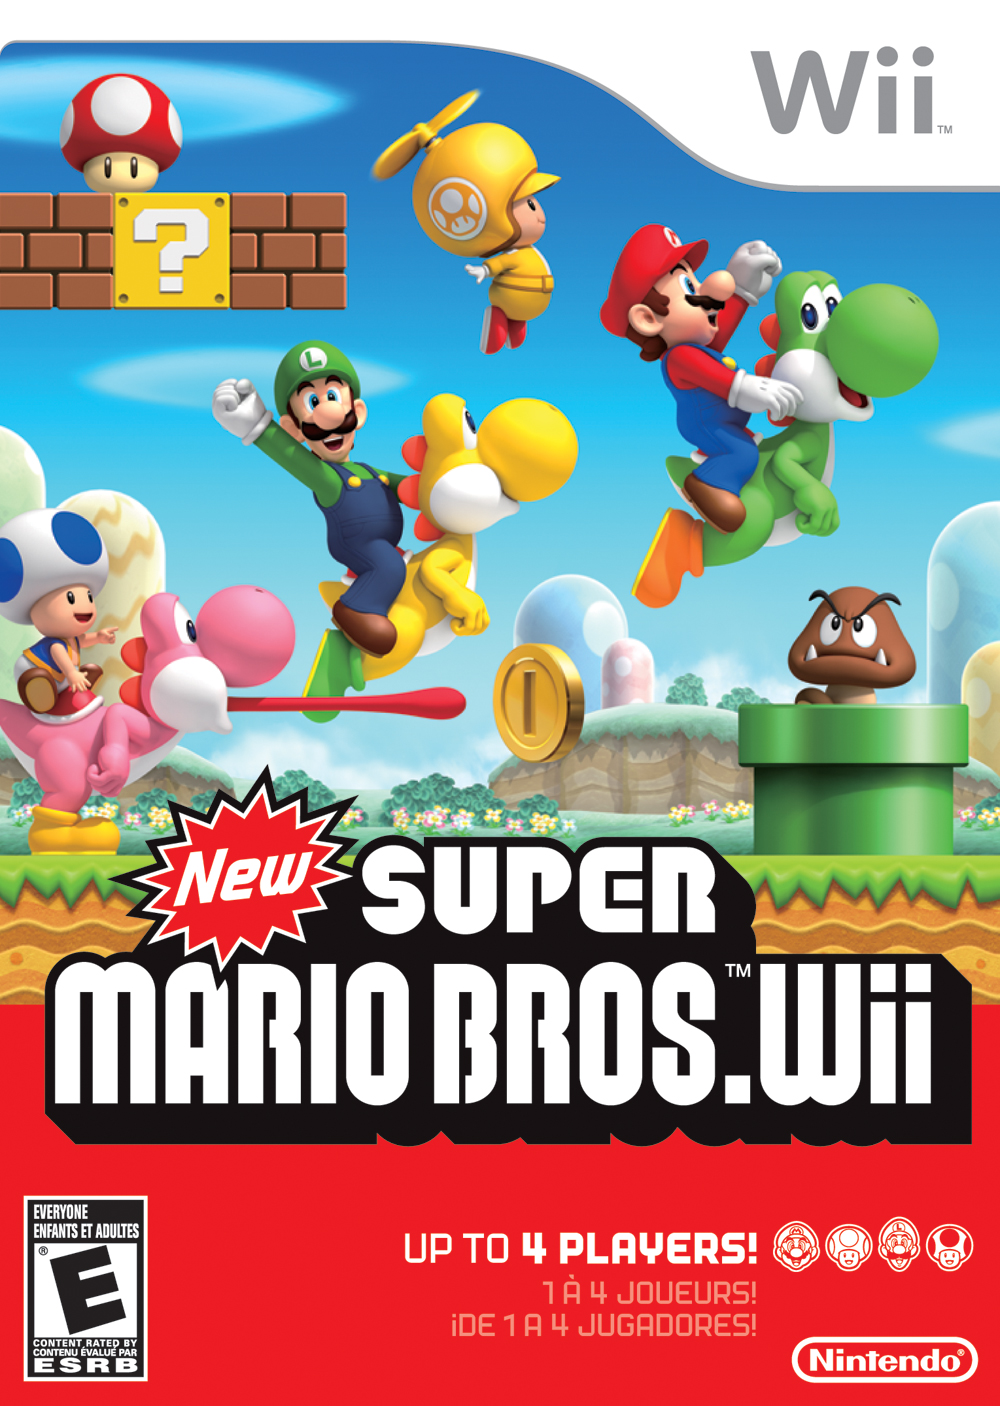 new-super-mario-bros-wii-strategywiki-strategy-guide-and-game